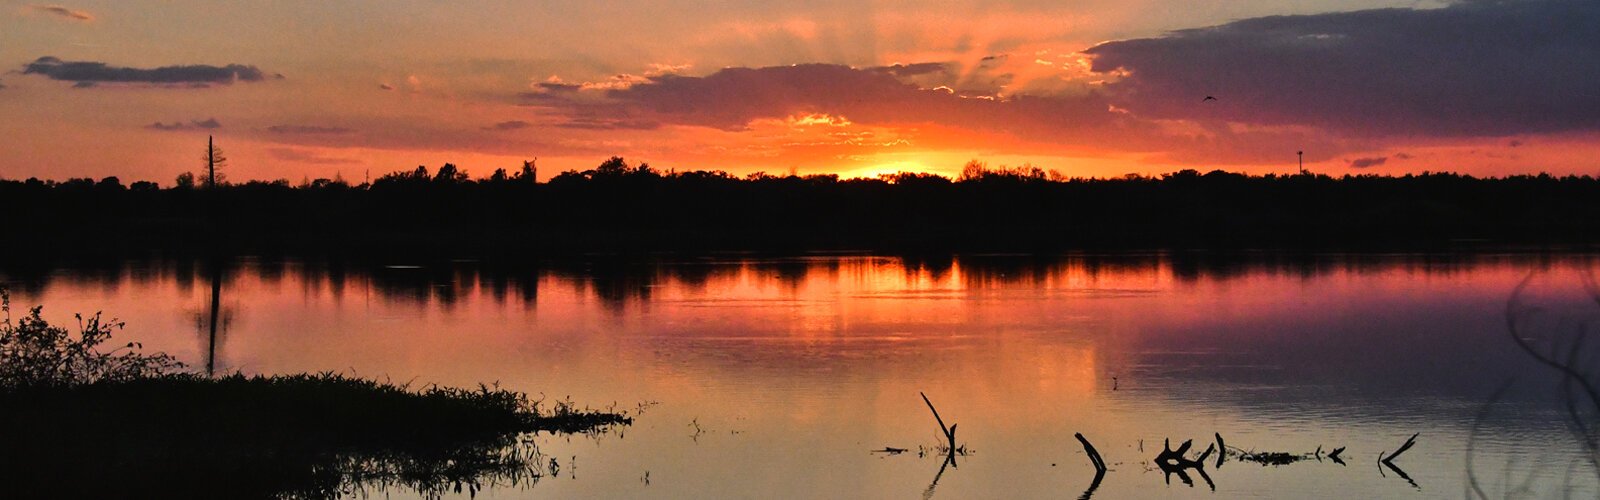  The sun sets gloriously on the Banana Creek marsh system, restored after Polk County and the Southwest Florida Water Management District acquired Circle B Bar Reserve in 2000.